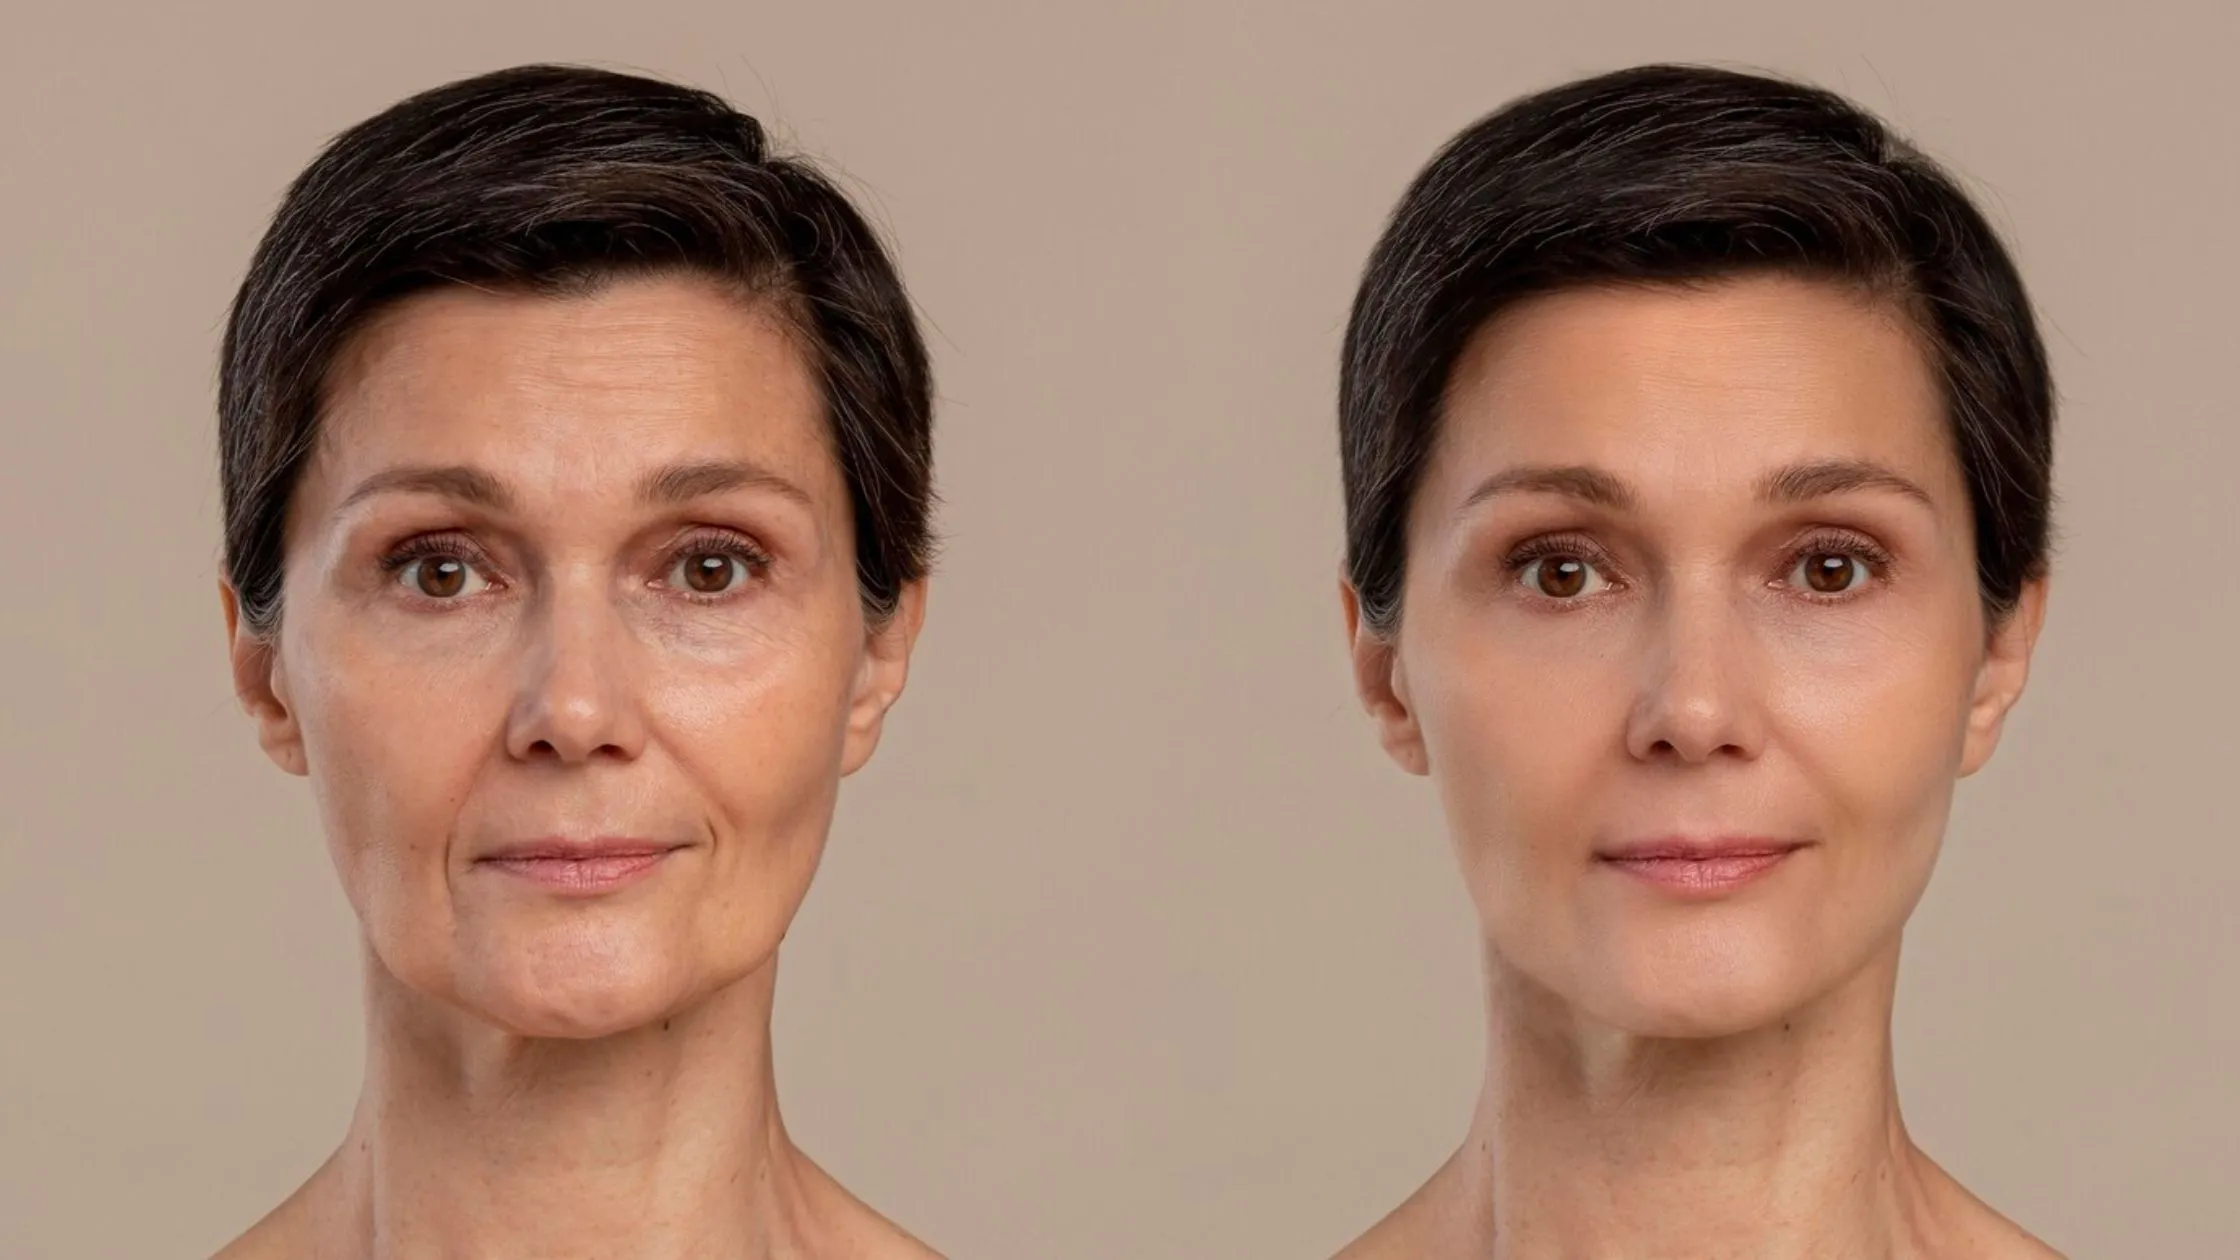 What Is Microneedling Before And After Change?